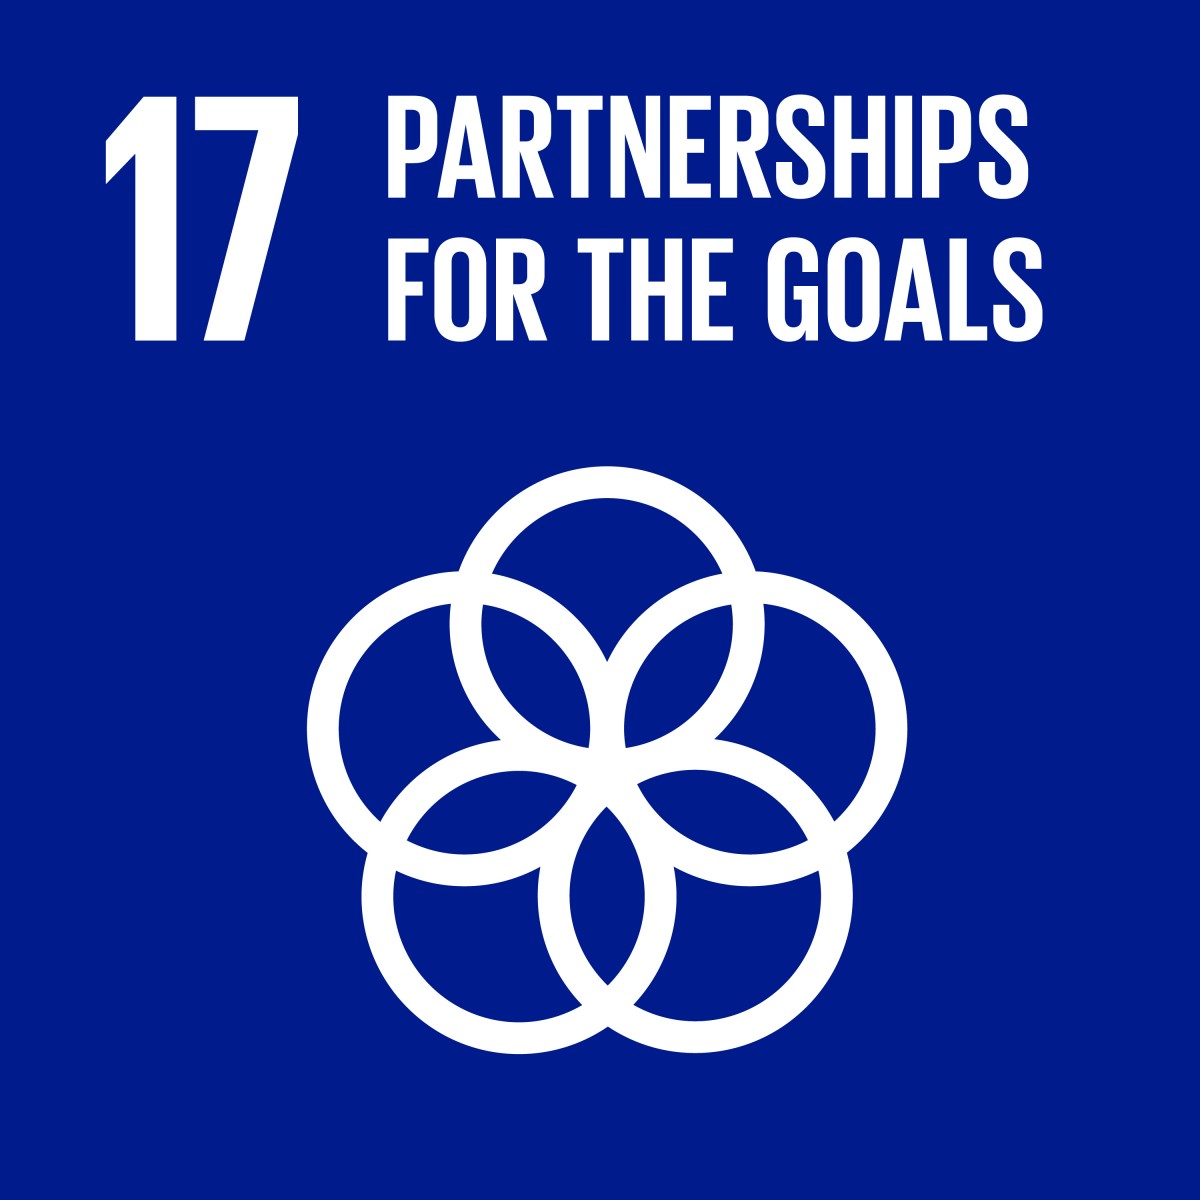 partnerships-for-the-goals